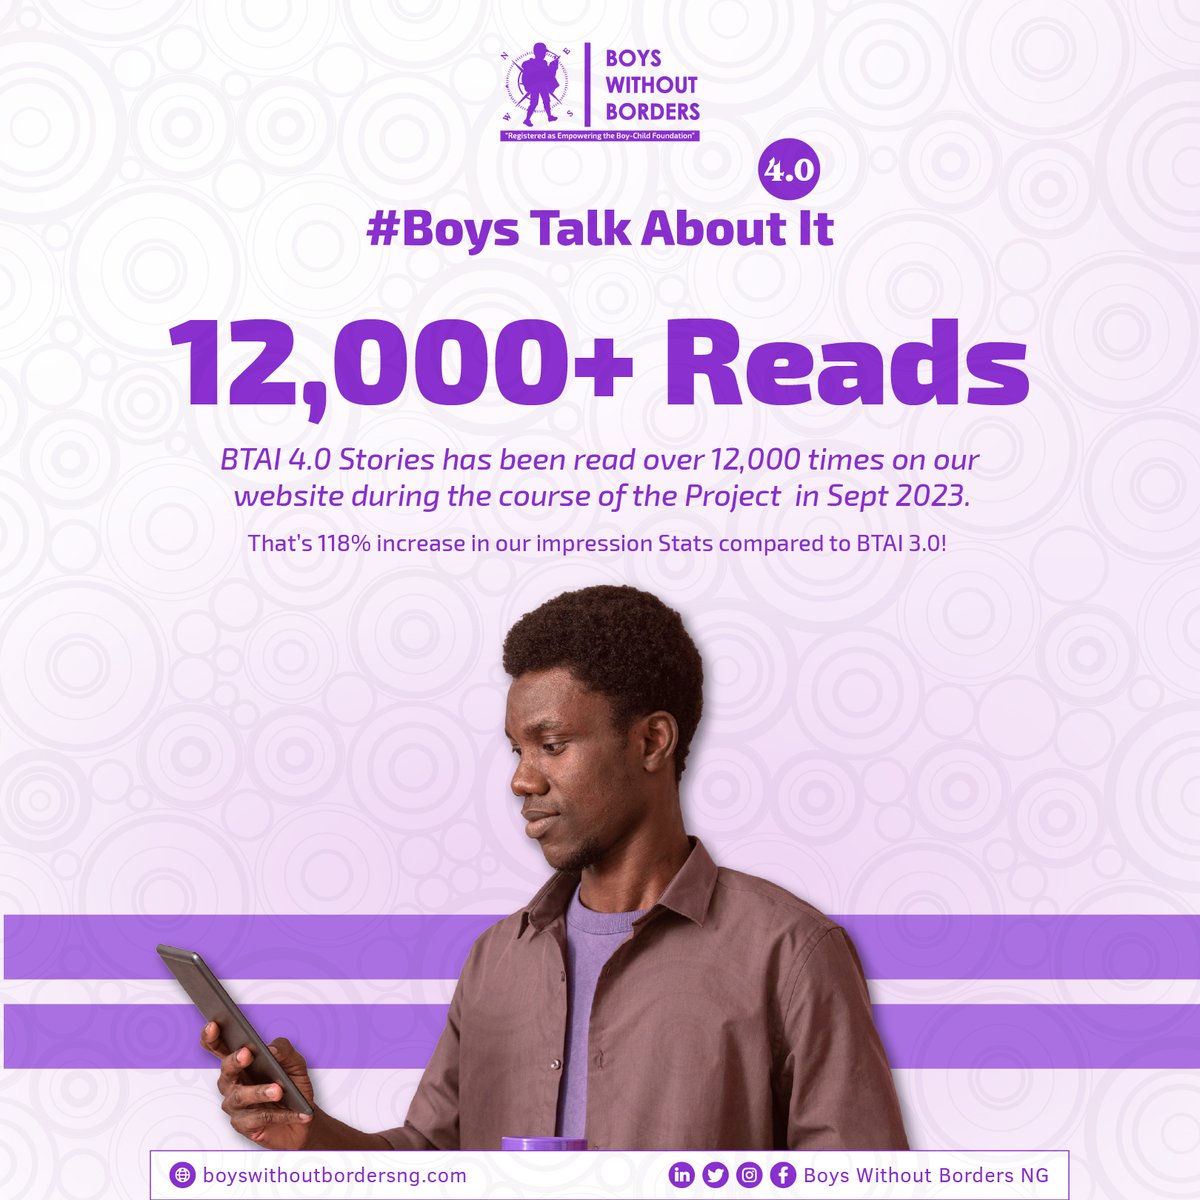 Thank you for reading. Thank you for sharing. Thank you for spreading the awareness. Thank you for boosting the reach of the stories for BTAI 4.0.
 
#BoyswithoutBordersNG #sexualabuse #rape #campaignagainstrape #boystalkaboutit #BTAI4 #BeTheVoice #SexualAbuse